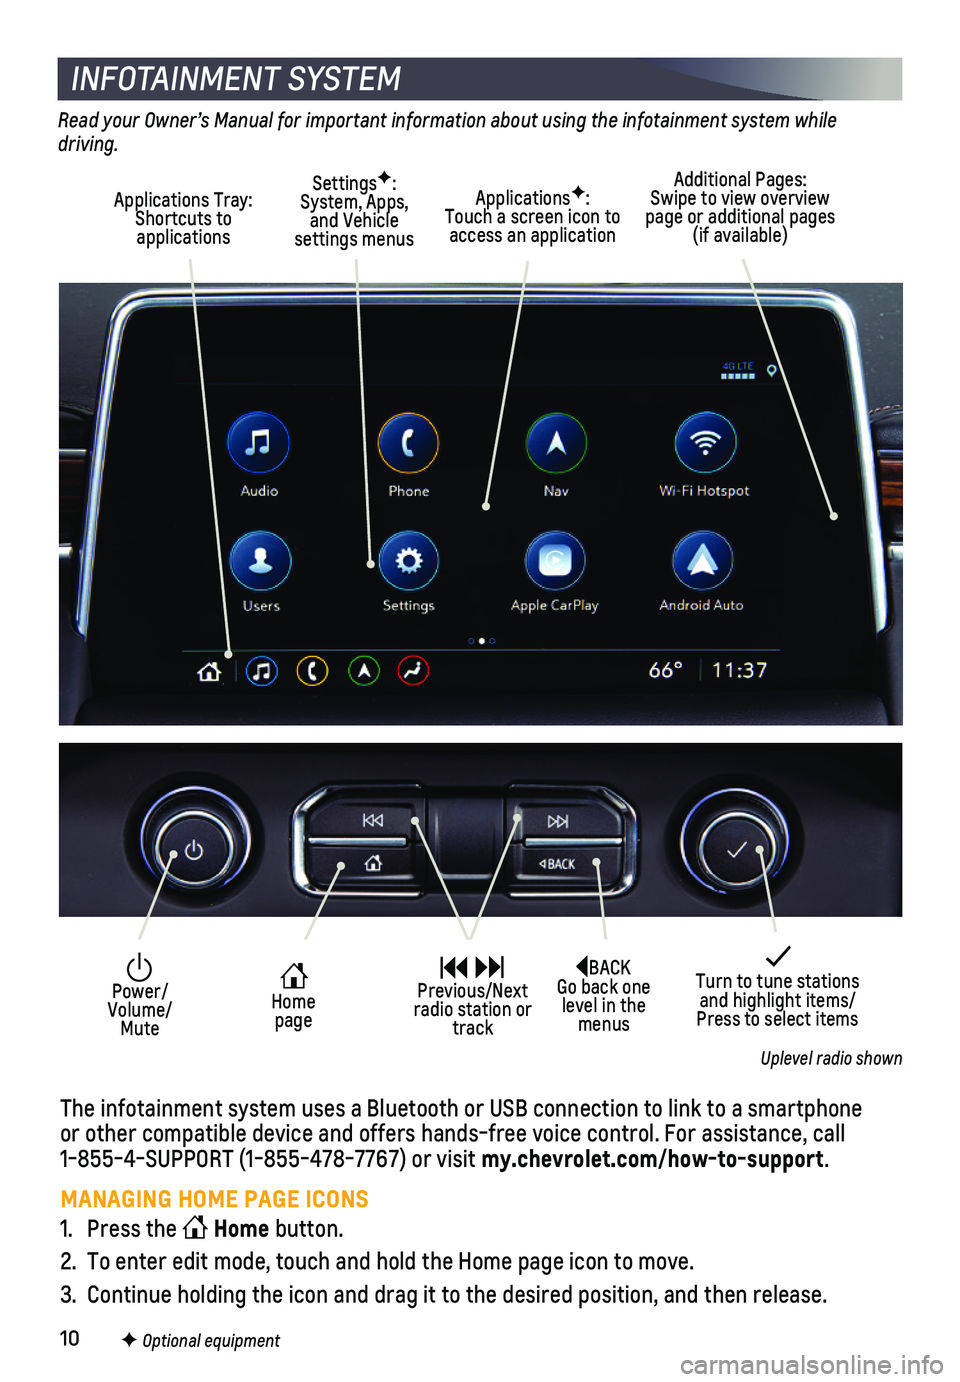 CHEVROLET TAHOE 2021  Get To Know Guide 10F Optional equipment
INFOTAINMENT SYSTEM
Read your Owner’s Manual for important information about using the infotainment system while driving. 
Additional Pages: Swipe to view overview page or add